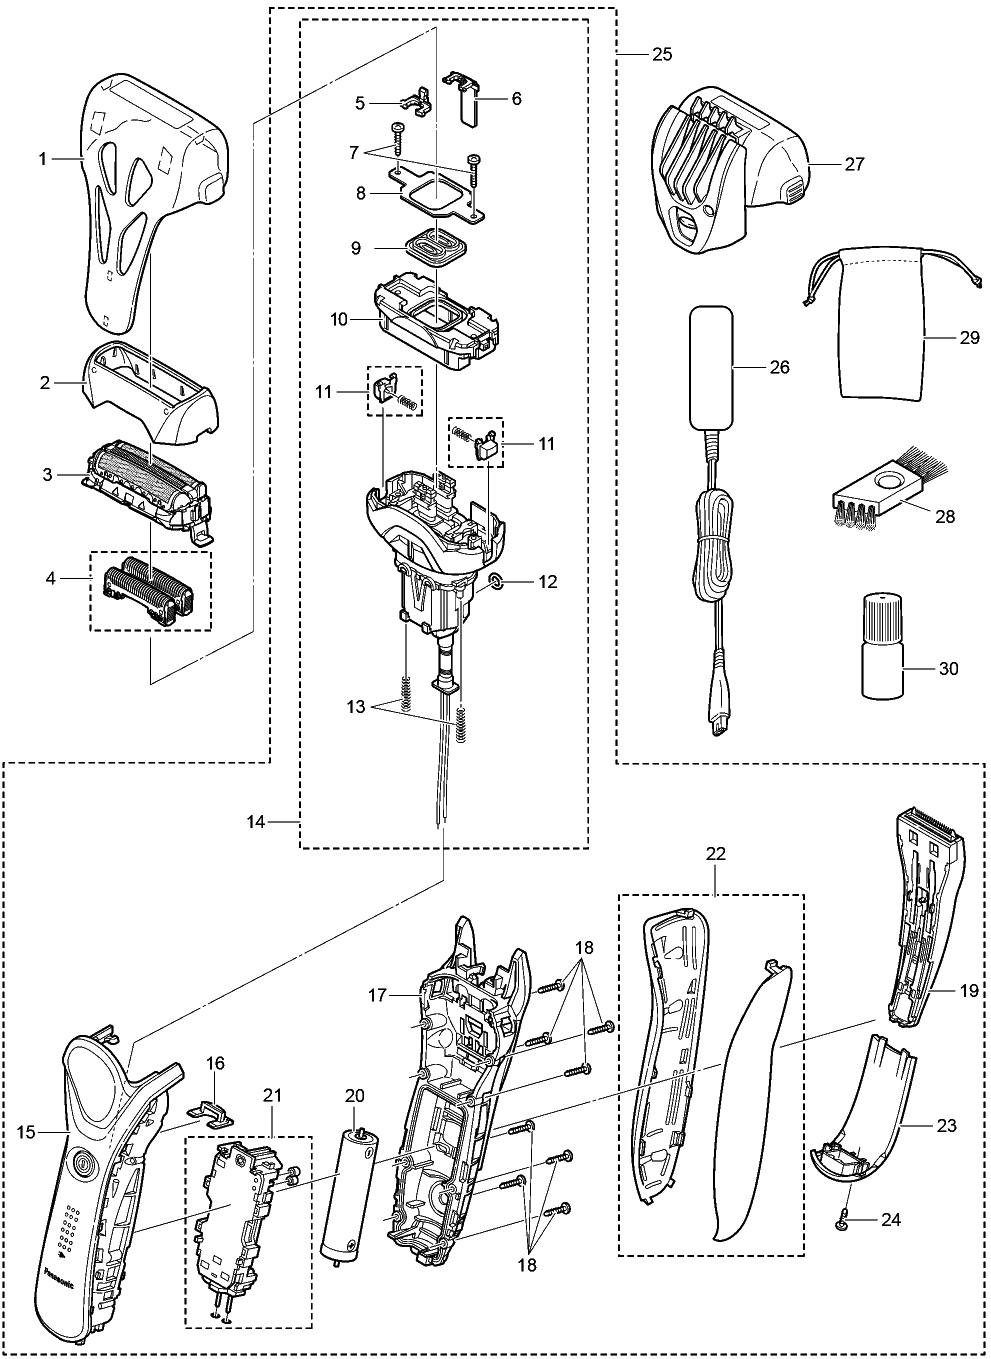 ES-RT77: Exploded View